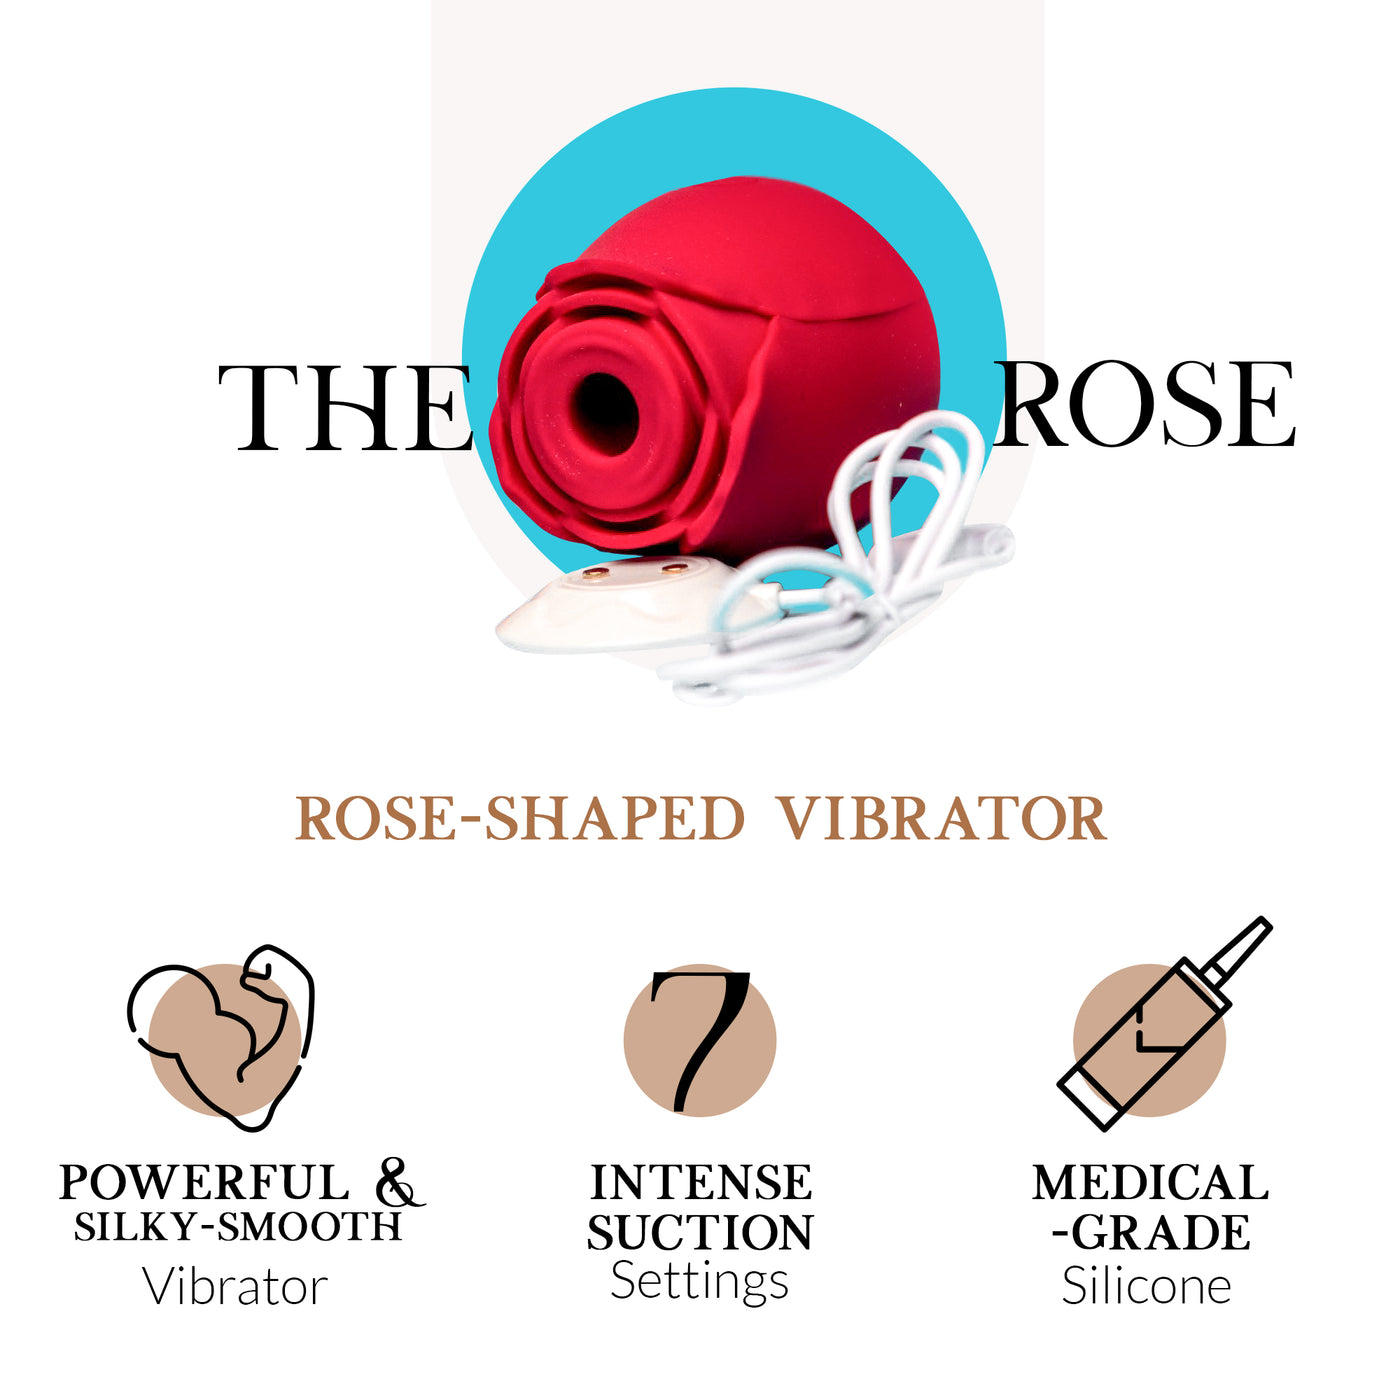 Yoni Oil Gift Set. Rose Toys For Women, Sucking Vibrator with 7 Intense suction. Feminine Oil Vaginal Health Moisturizer and Soothing Relief 1 Gift Set (Rose Vibrator + Yoni Oil)